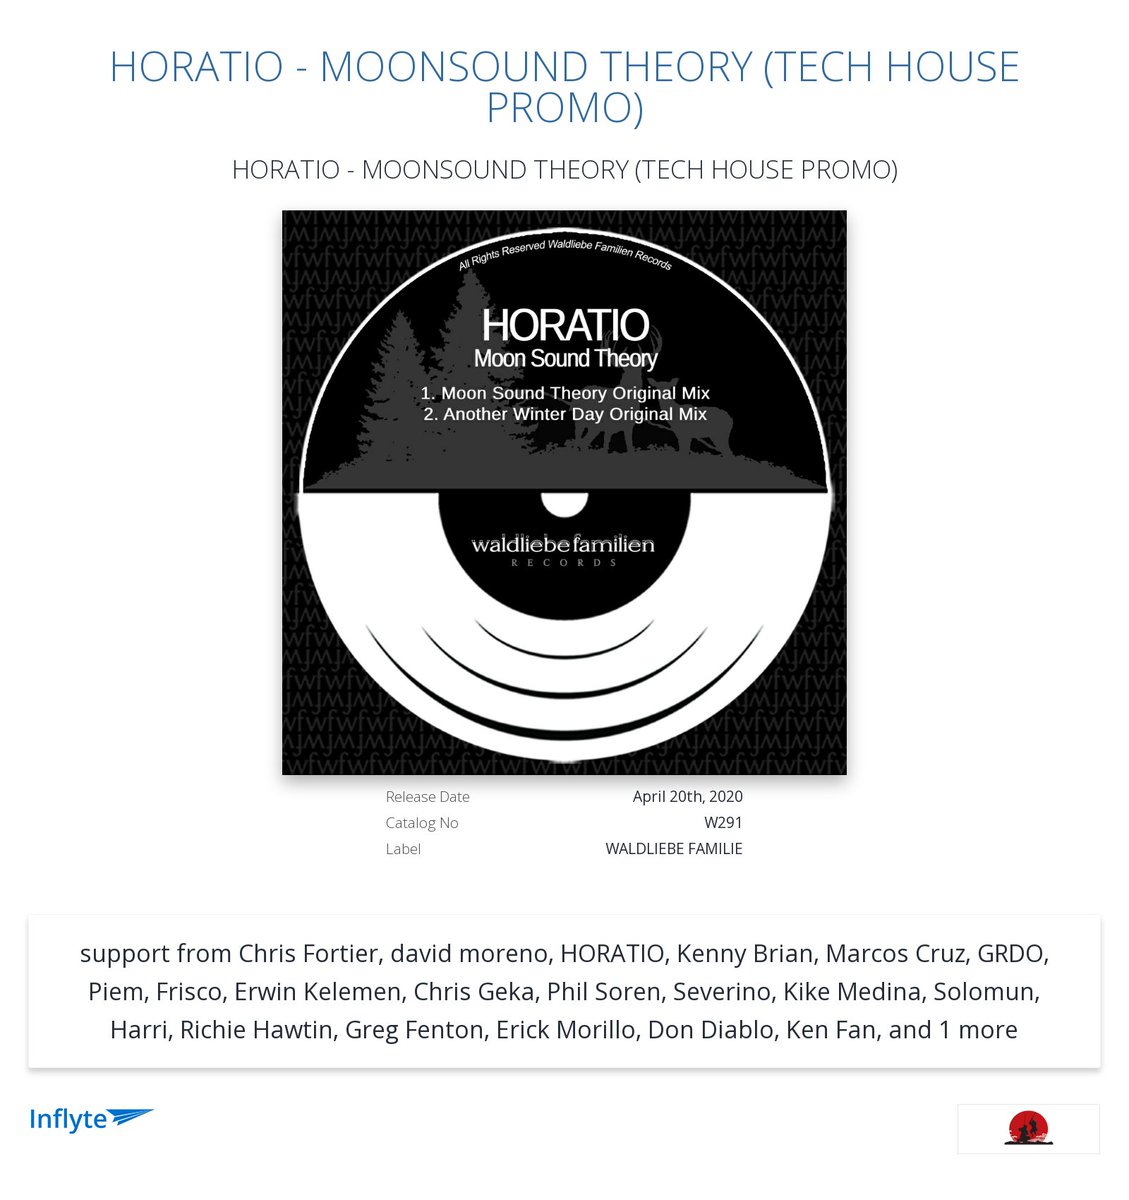 Cheers @DjDavidmoreno for the review ' Support on ibizadance radio show by David Moreno